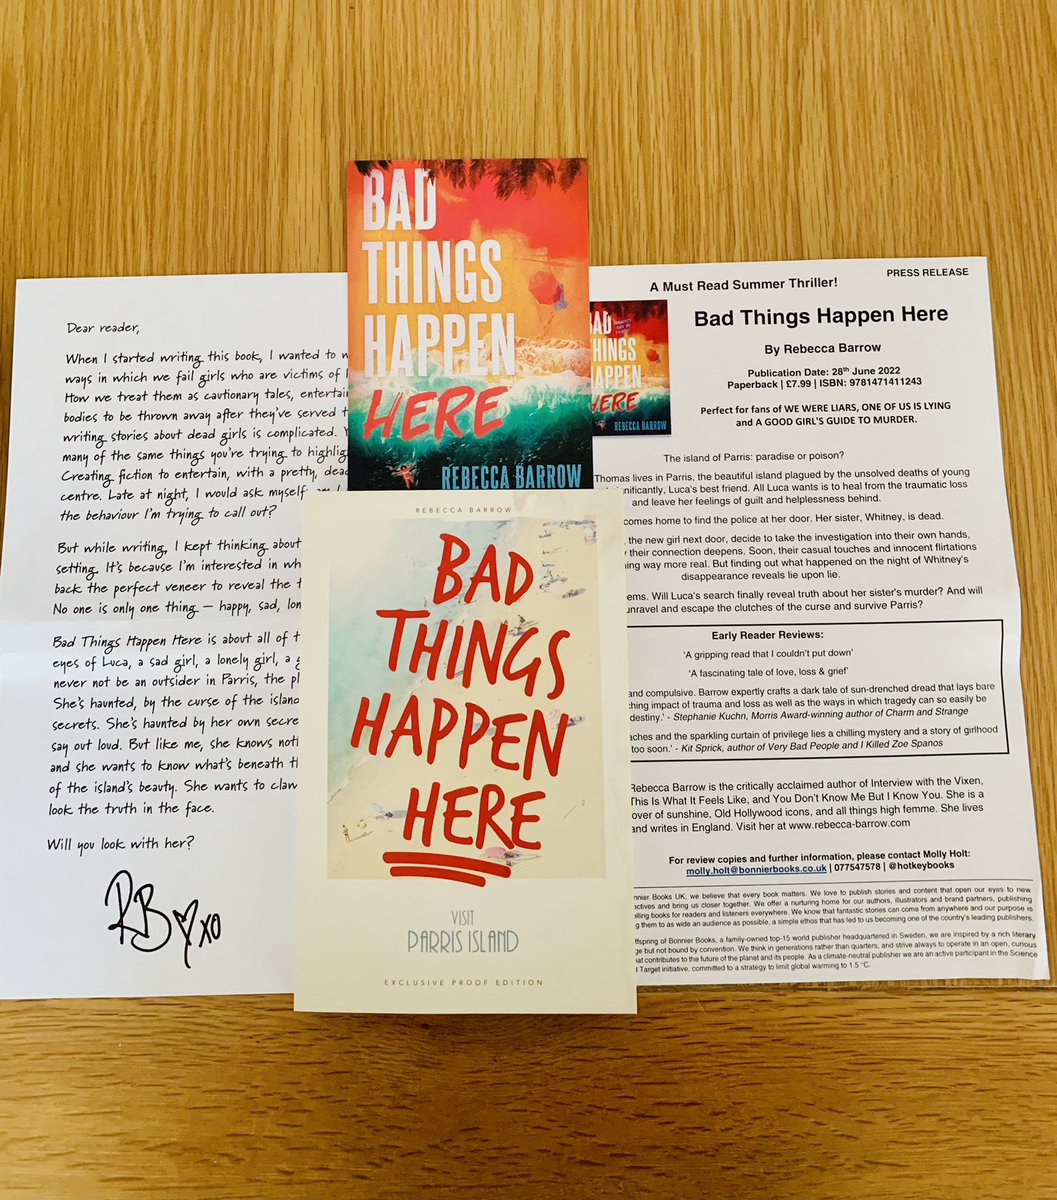 ✨Huge thanks to @eleanormrosee & @HotKeyBooksYA for this stunning proof of #BadThingsHappenHere by @rebeccakbarrow ✨

Out 28th June 🏝

#BookTwitter #booktwt